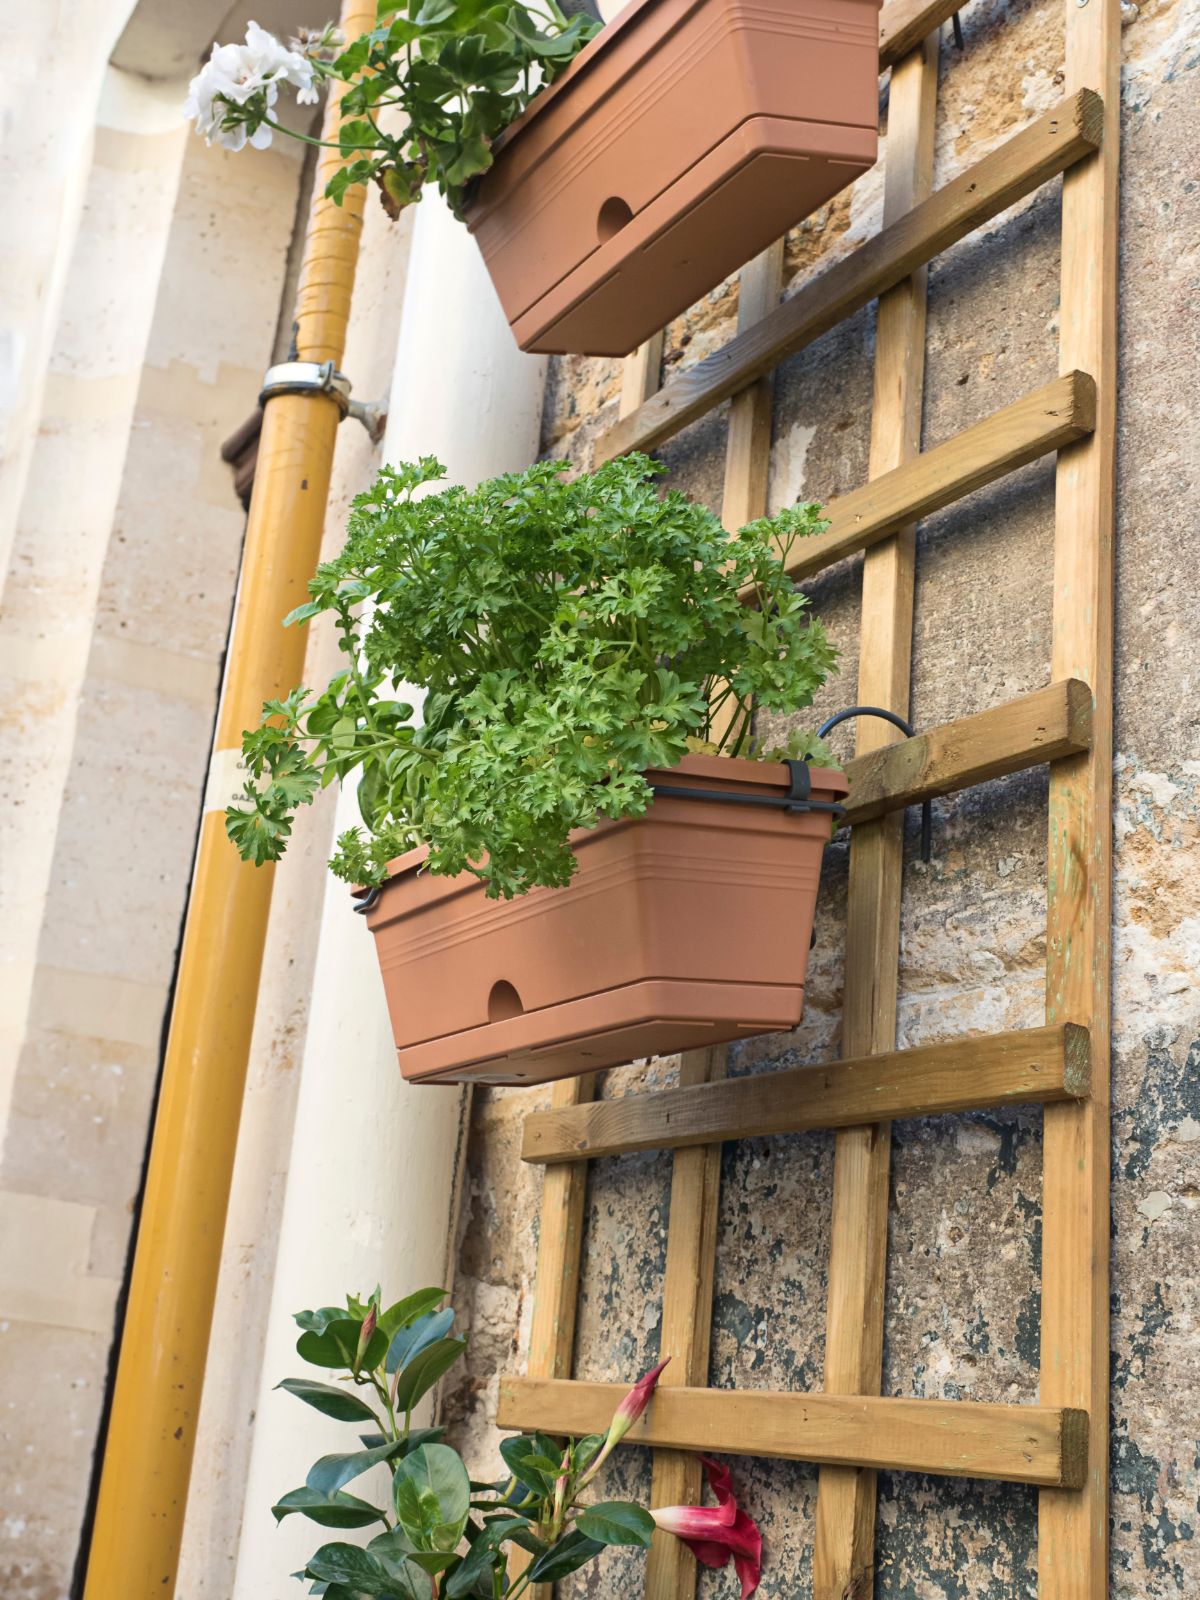 A trellis fitted with hanging planter boxes planted with herbs